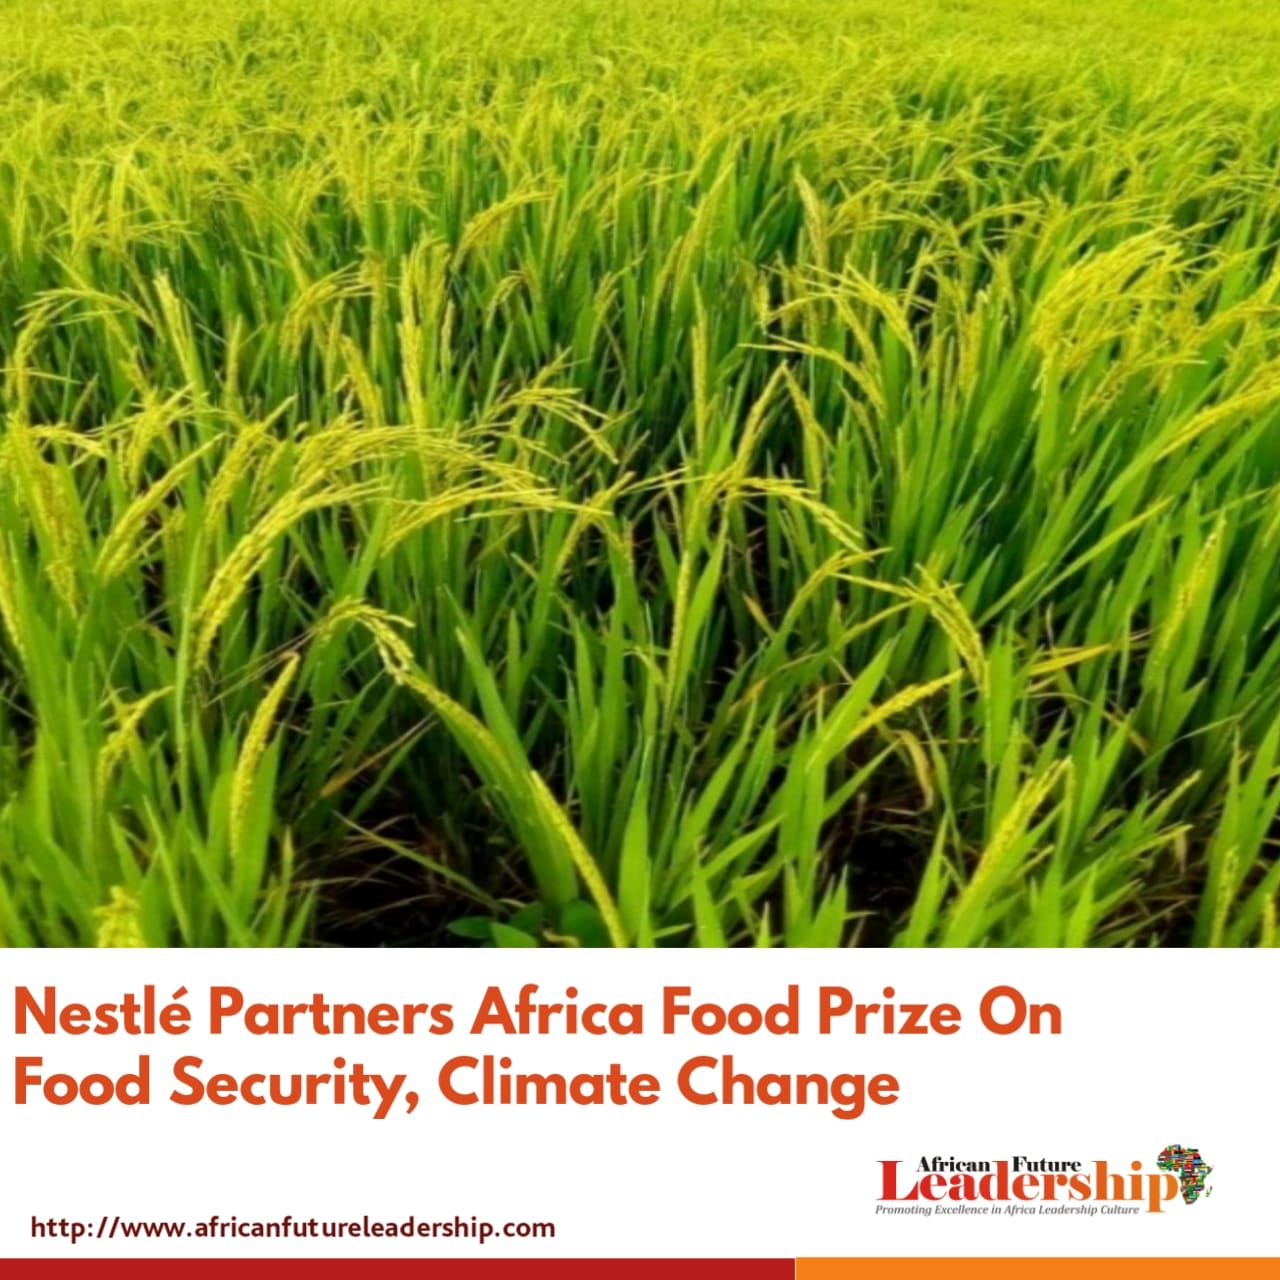 Nestlé Partners Africa Food Prize On Food Security, Climate Change